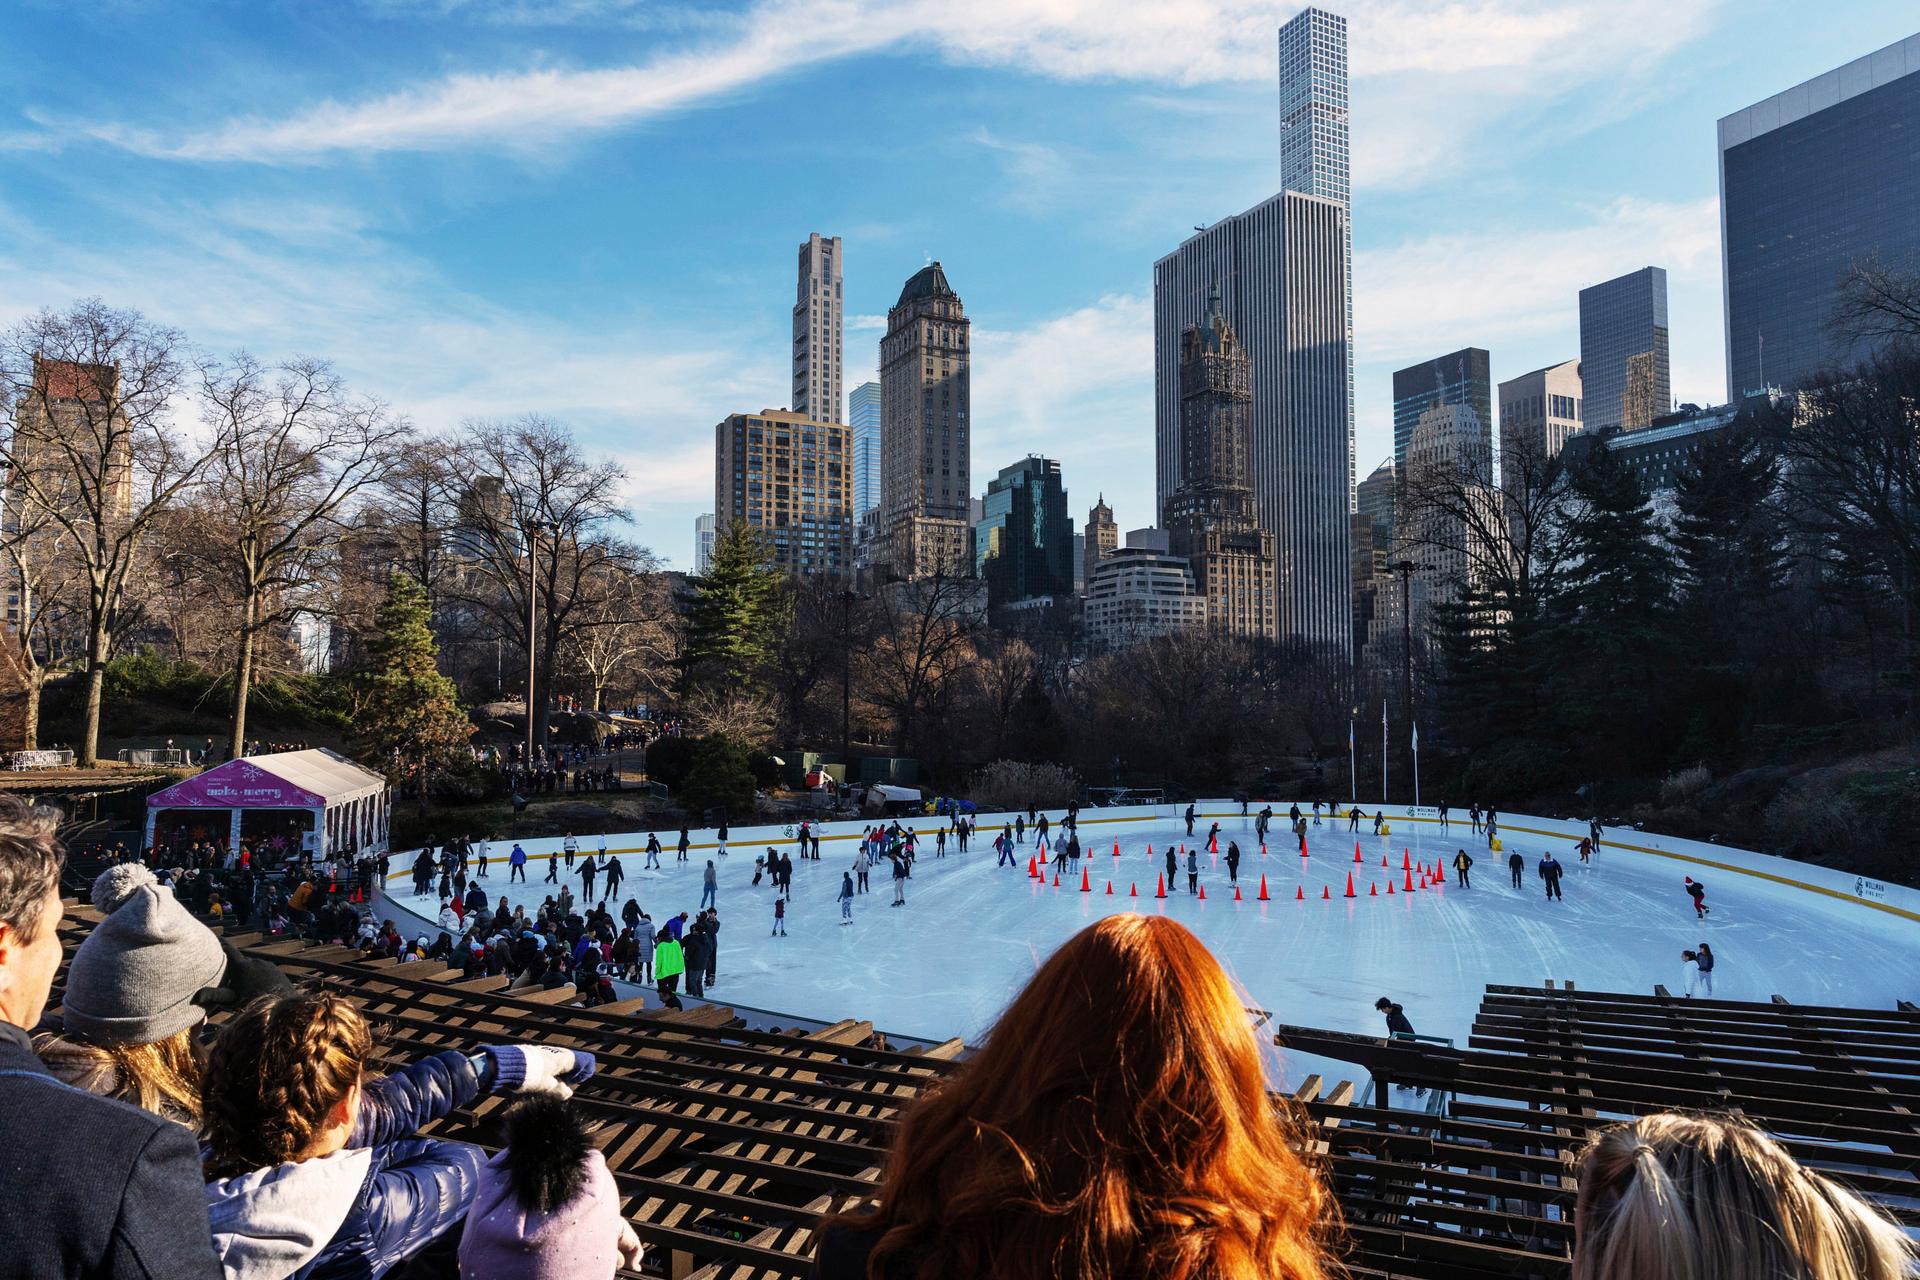 People ice skating at Wollman Rink in Central Park